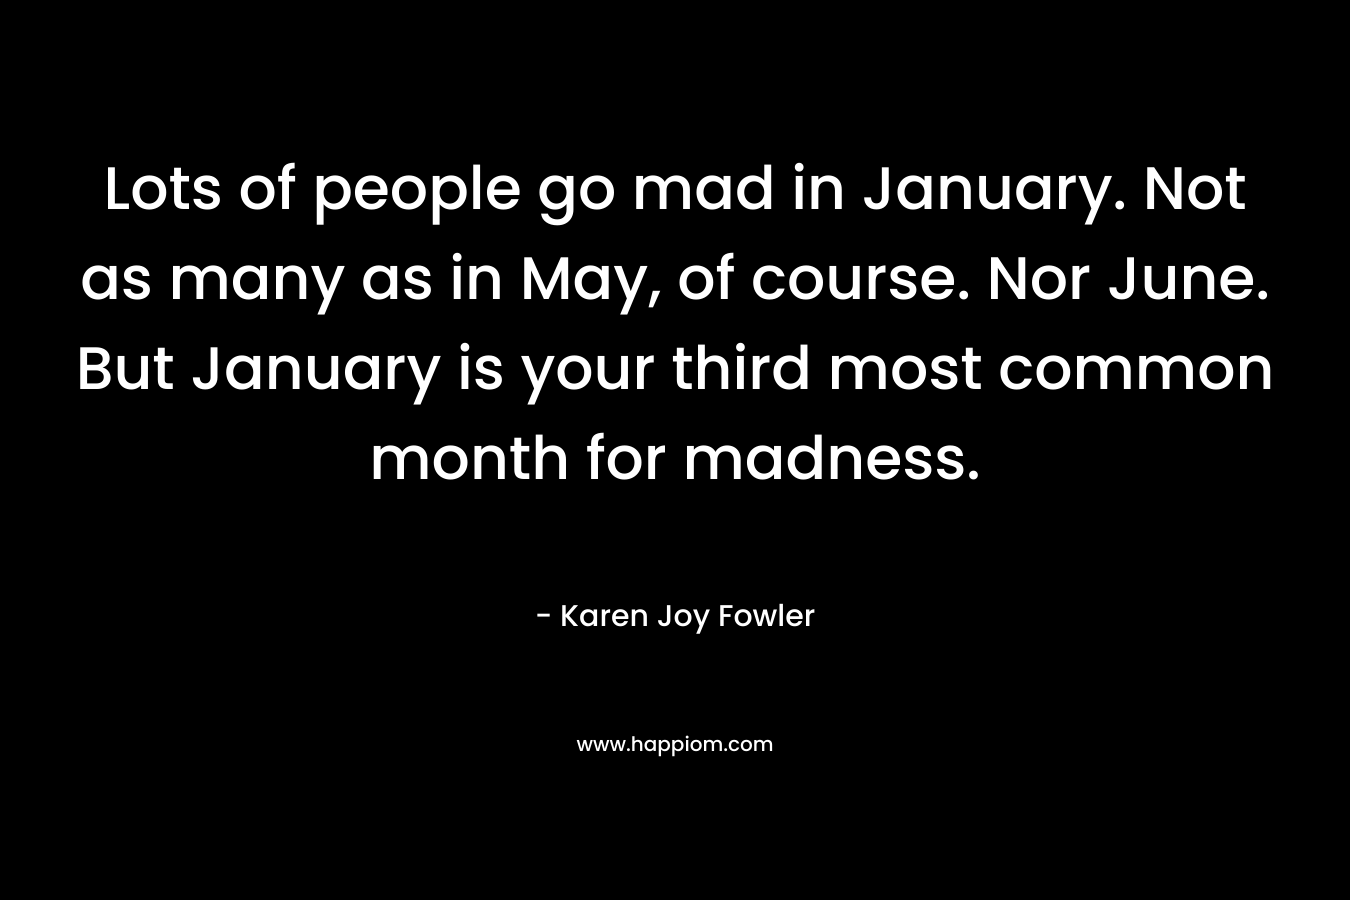 Lots of people go mad in January. Not as many as in May, of course. Nor June. But January is your third most common month for madness. – Karen Joy Fowler